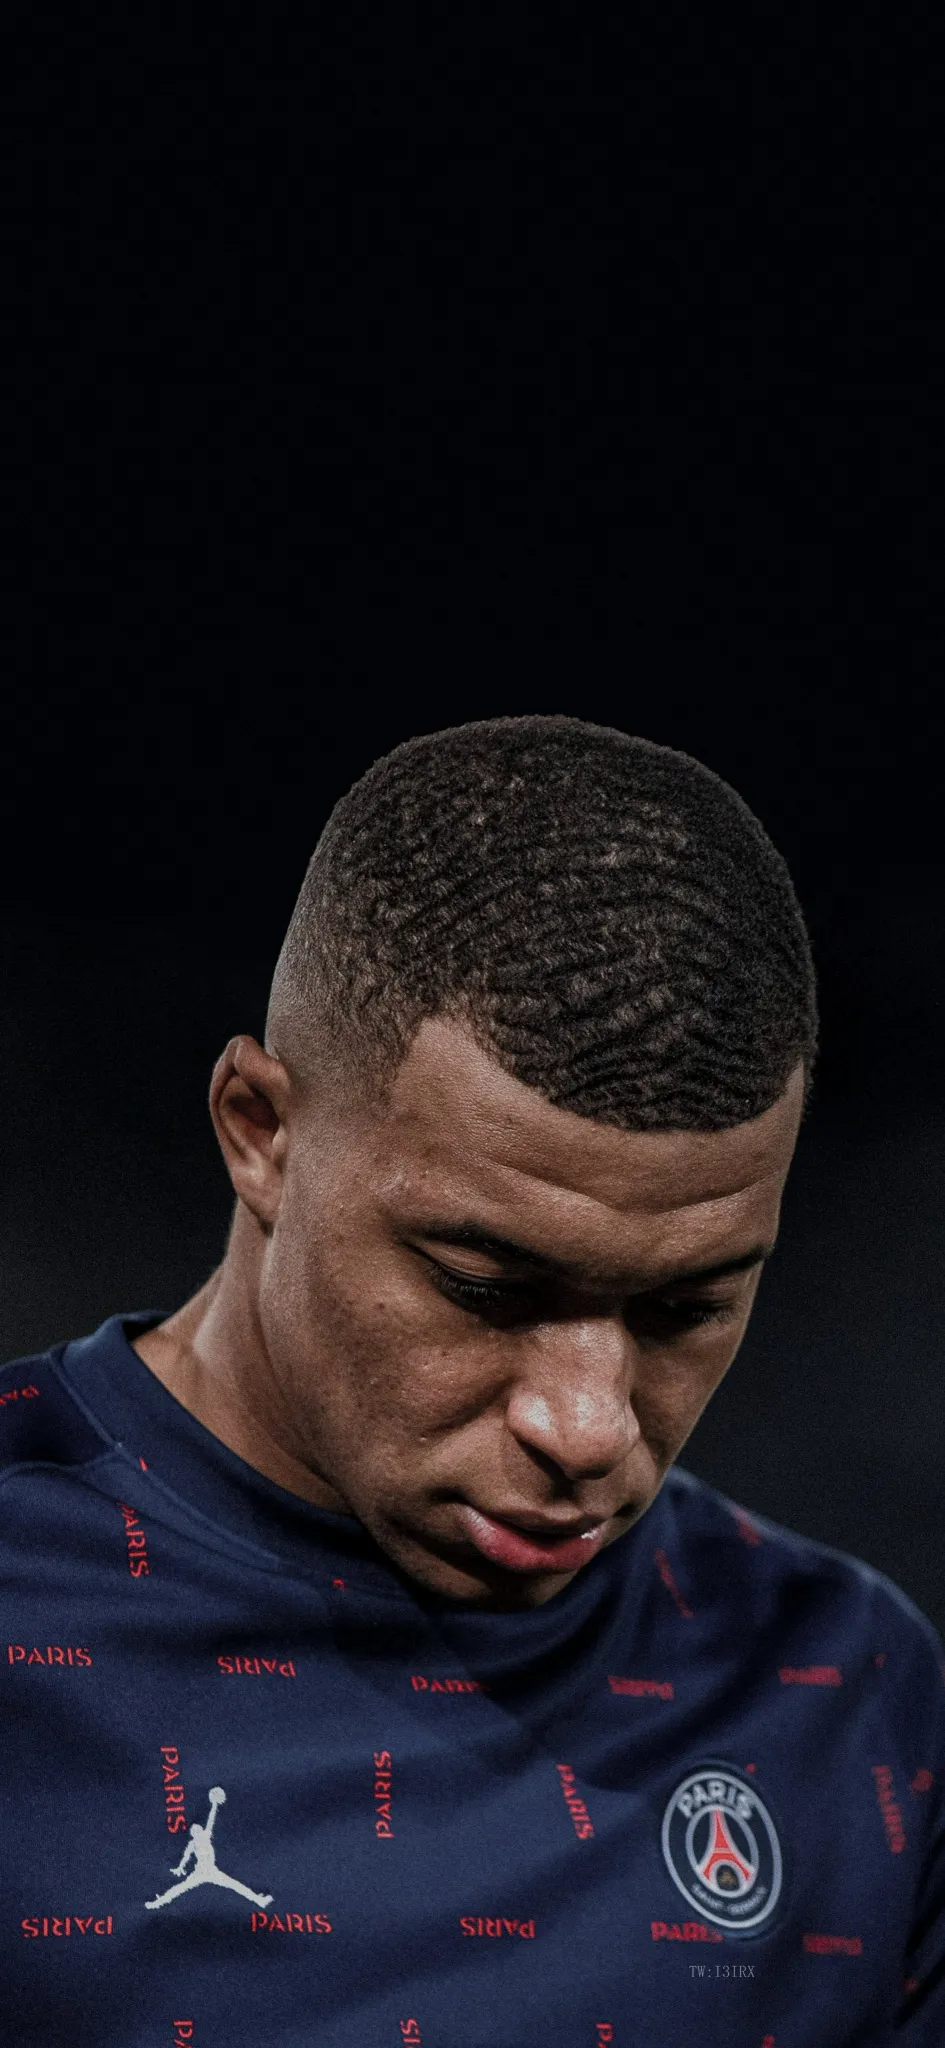 thumb for Kylian Mbappé Wallpaper For Iphone